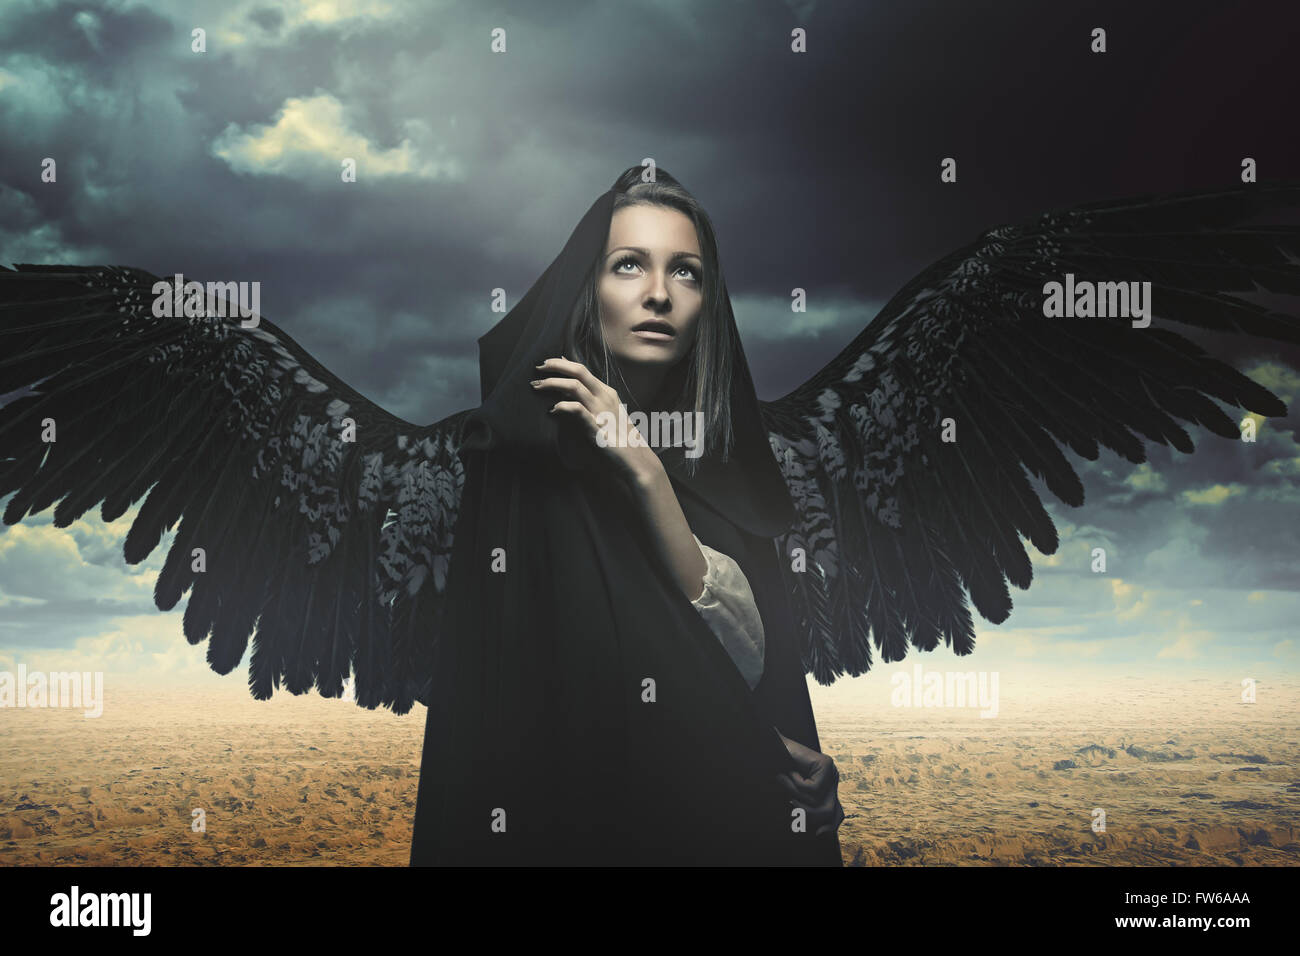 Fallen angel in a desert and stormy landscape. Fantasy and surreal Stock Photo